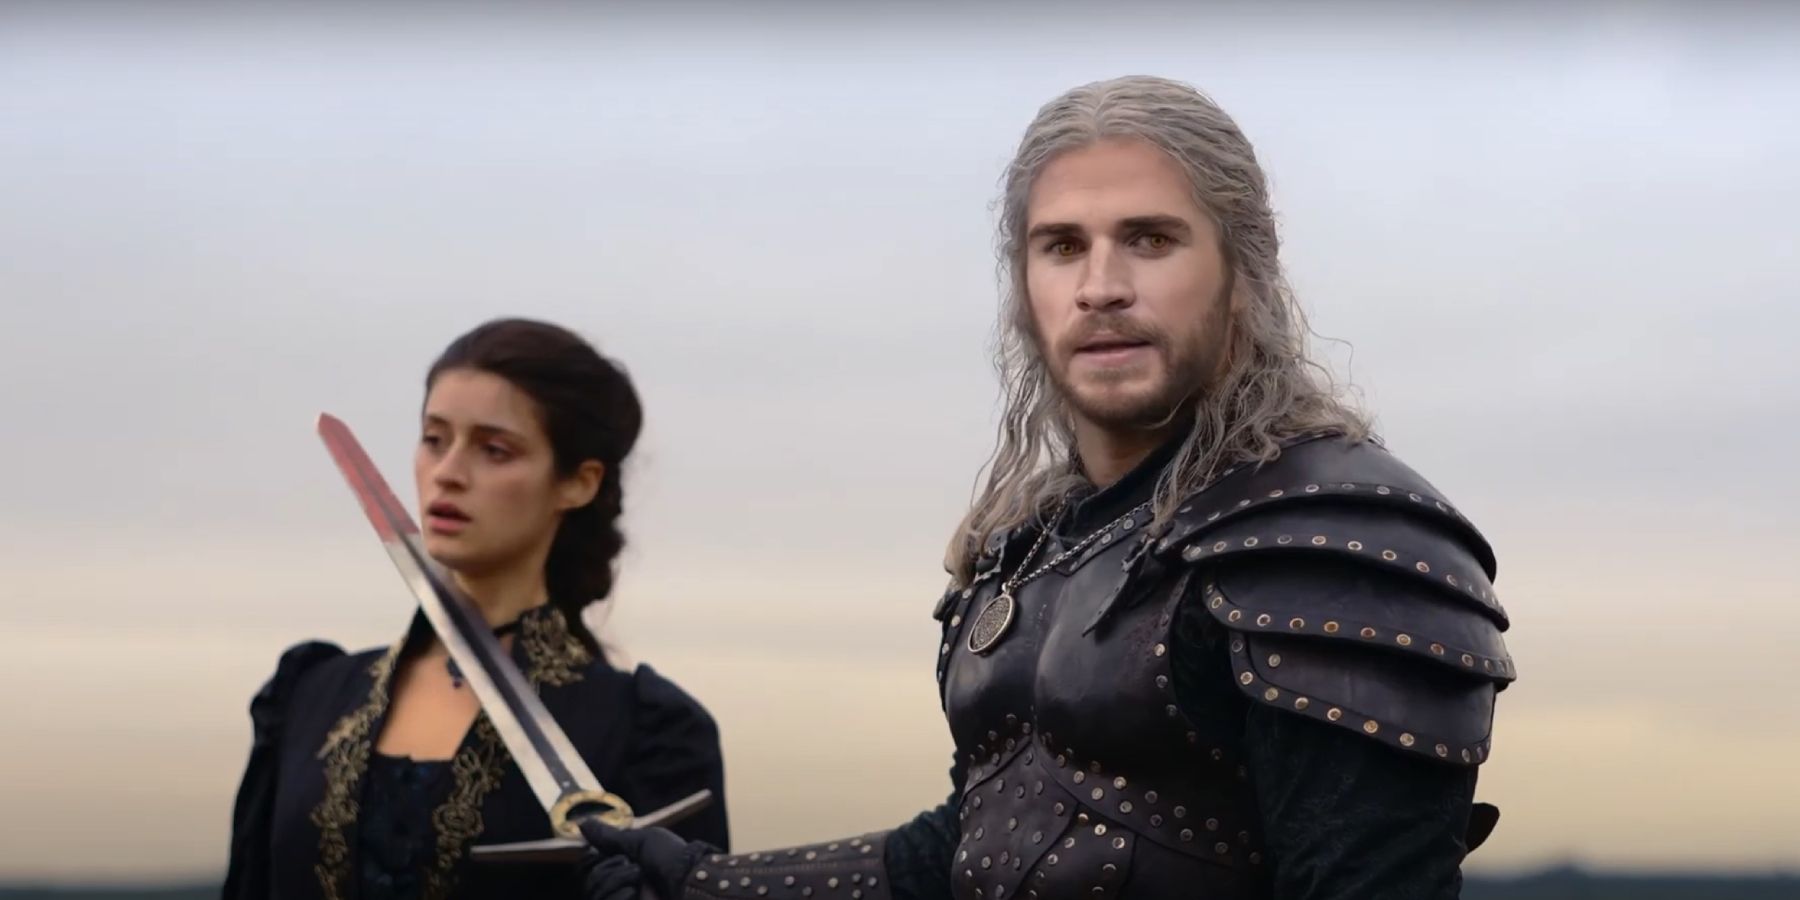 Liam Hemsworth as The Witcher deepfake with Yennefer